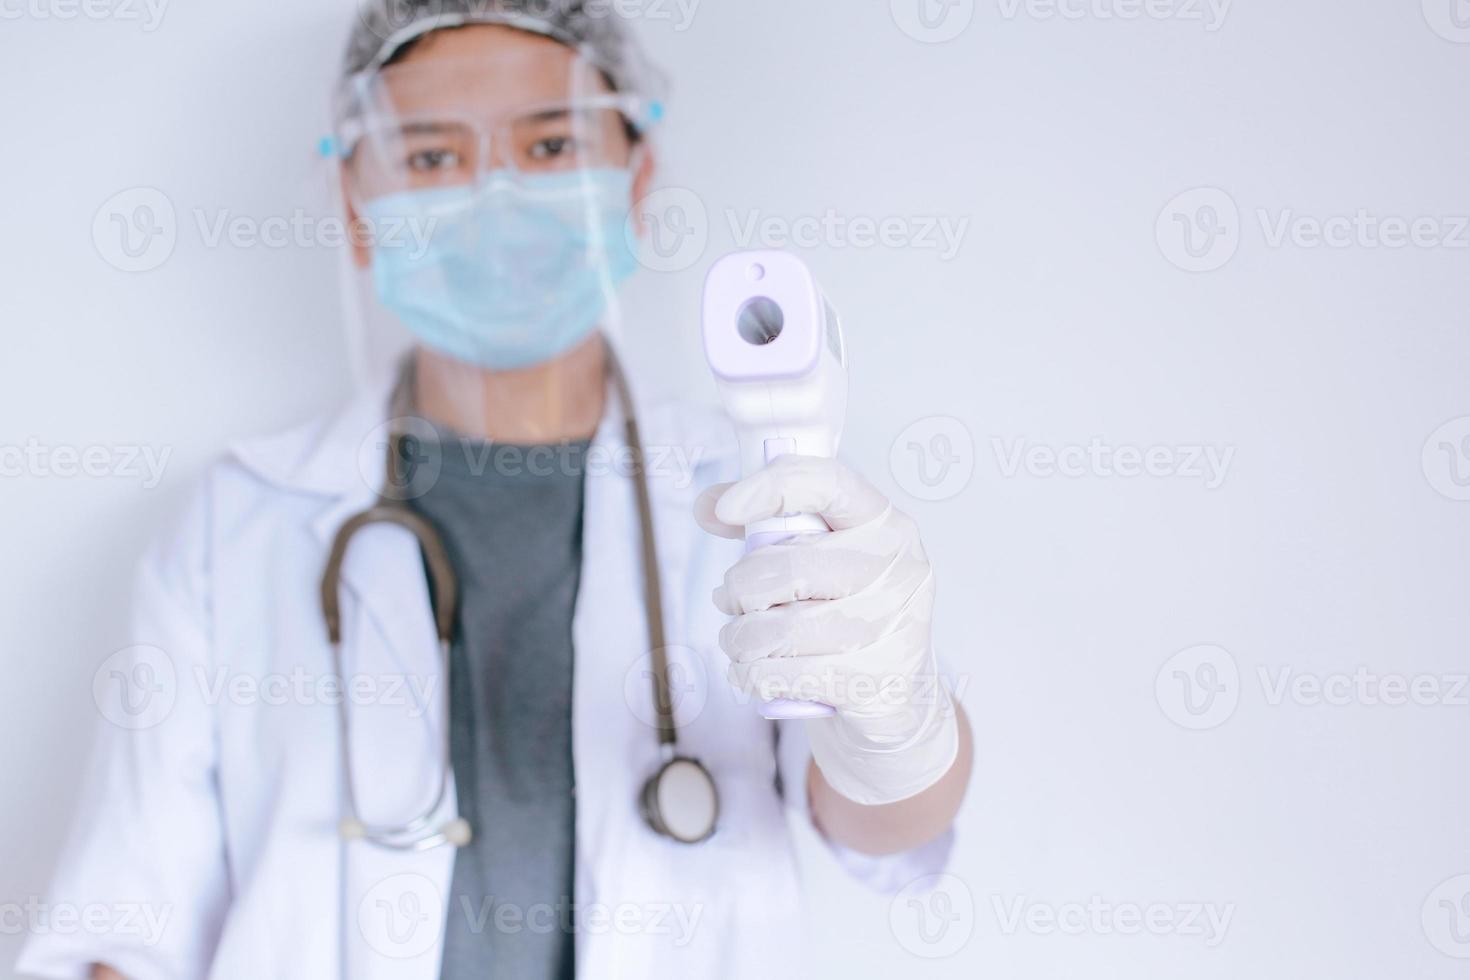 Close-up shot of doctor wearing protective mask ready to use infrared forehead thermometer or thermometer gun to check body temperature for virus symptoms and epidemic virus outbreak photo